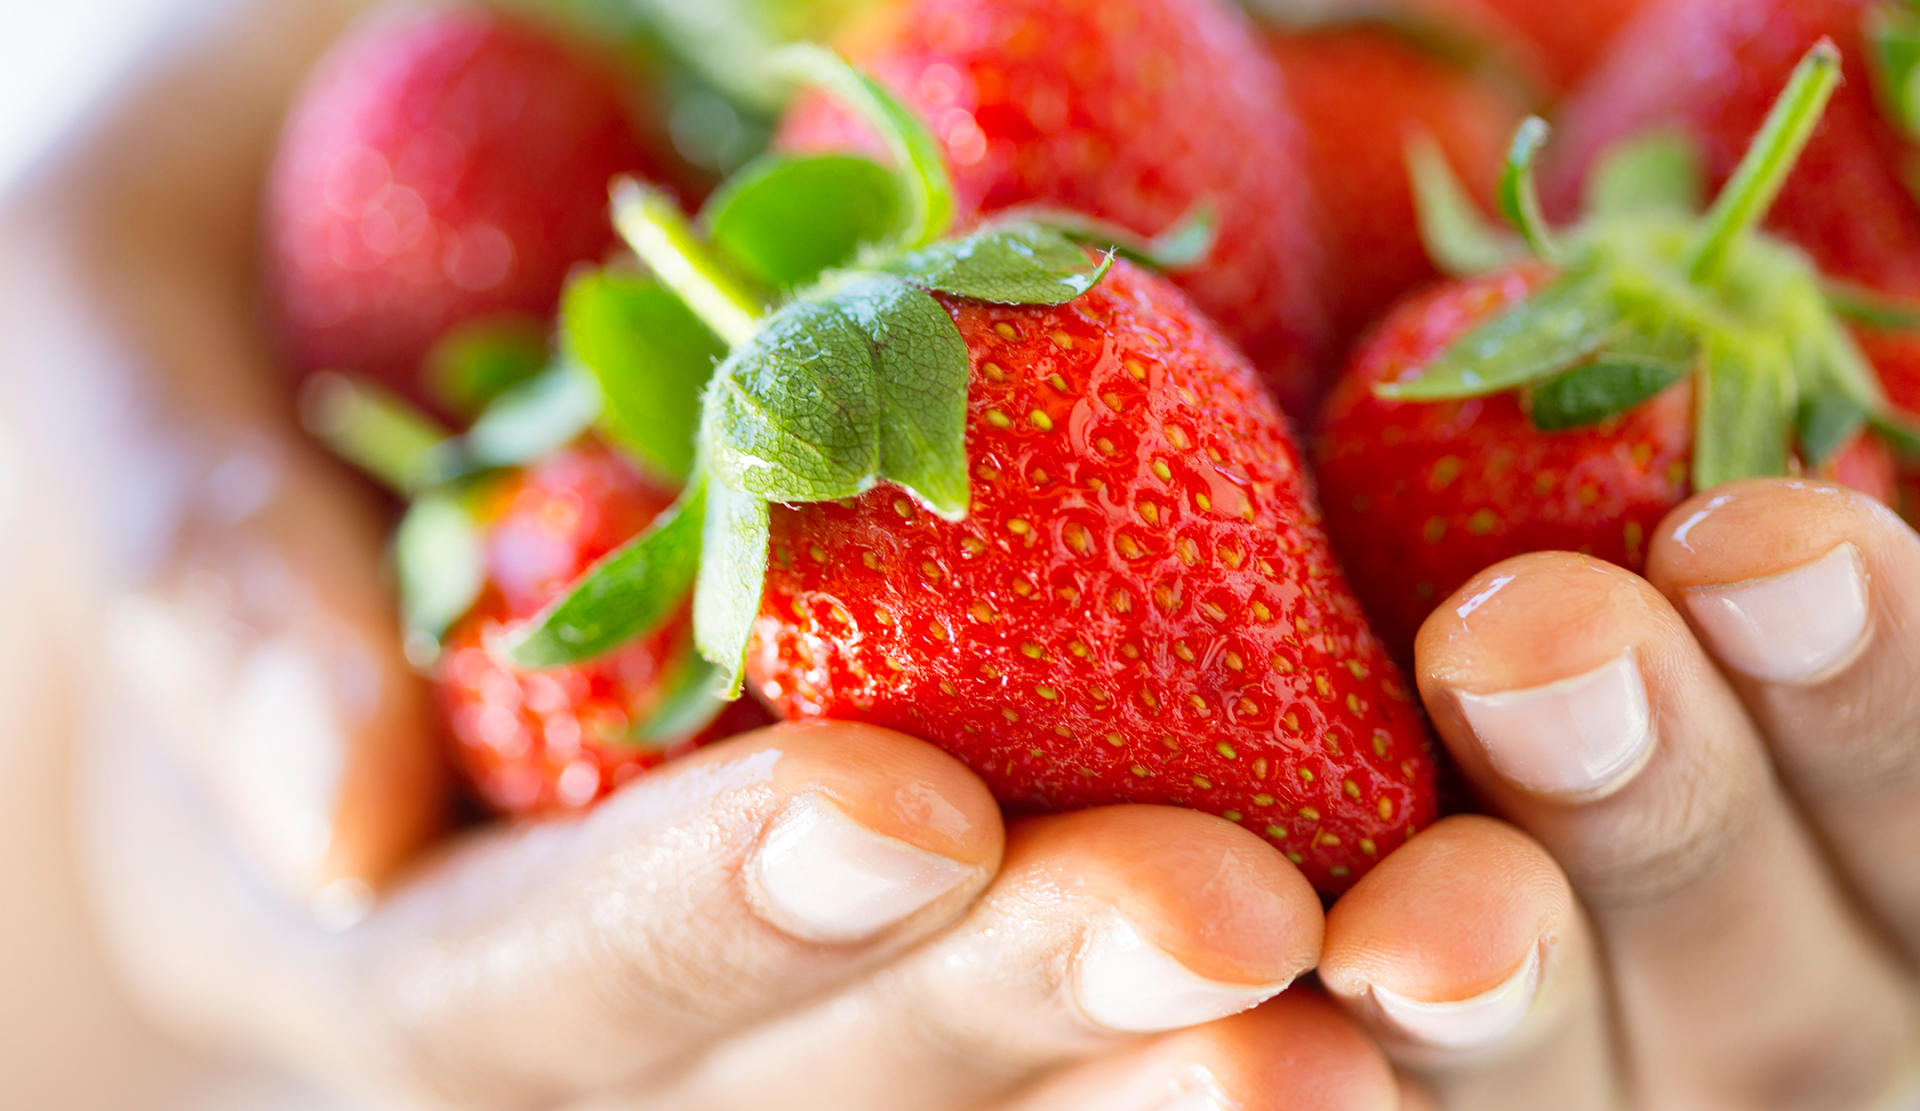 Two hands holding ripe red strawberries.